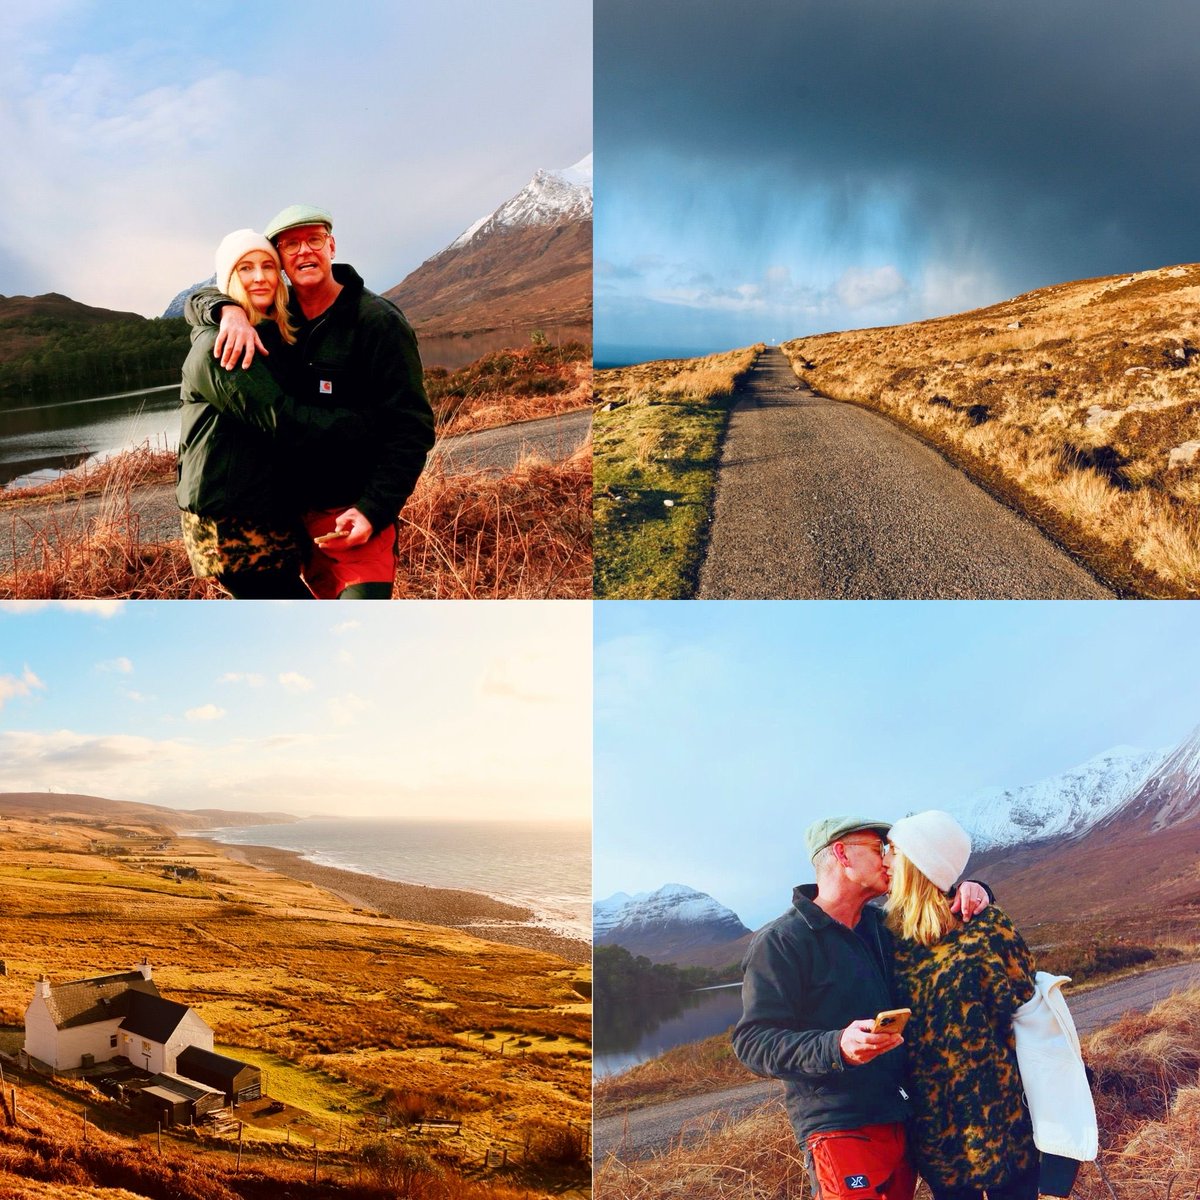 Today - happy 20th wedding anniversary my beautiful darling Rach! We decided to do something completely different & made a mini trip up to the far Nth West #Scottishhighlands And OH MY GOD - the scenery is just jaw-dropping. Truly a must see if you can. Simply gobsmacked